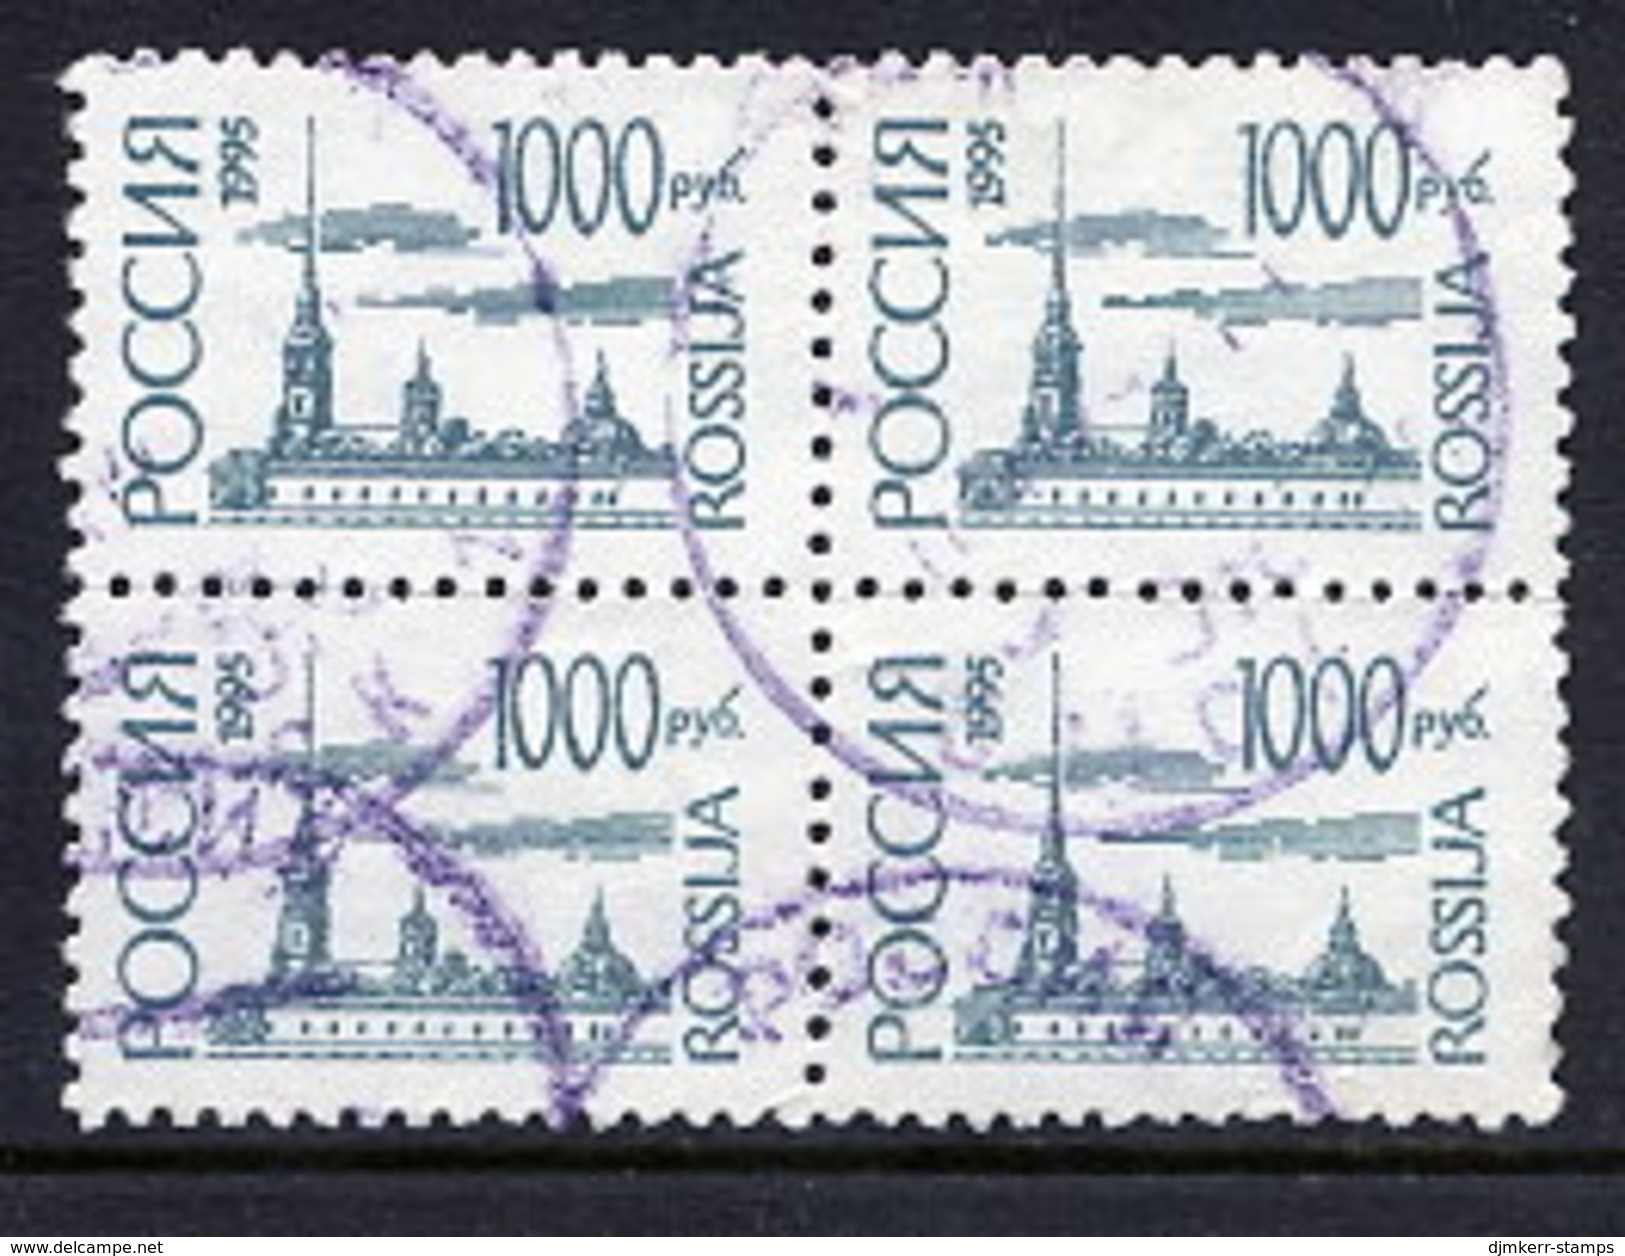 RUSSIAN FEDERATION 1995 Buildings Definitive 1000 R.  On Ordinary  Paper Block Of 4 Used.  Michel 414w - Usati